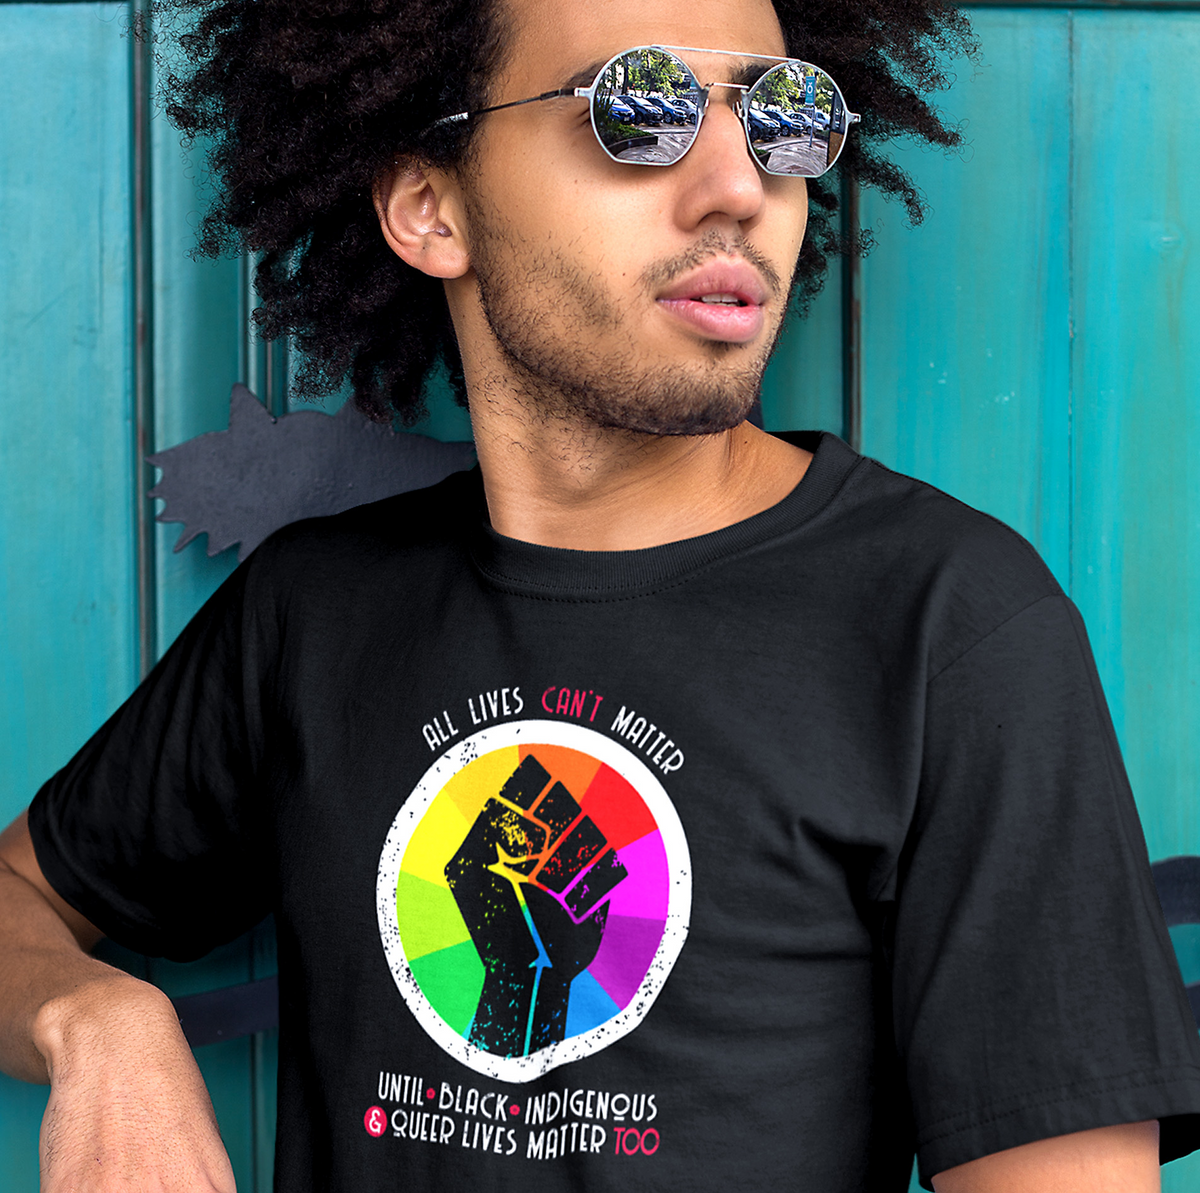 A Black man wearing a team purple tee with a graphic on the front of a circle with radial rainbow colors in it and a black fist over the colors. The text above the graphic is arced and reads “All lives can’t matter” and then horizontally below the graphic reads “until Black, Indigenous, & Queer lives matter, too”.